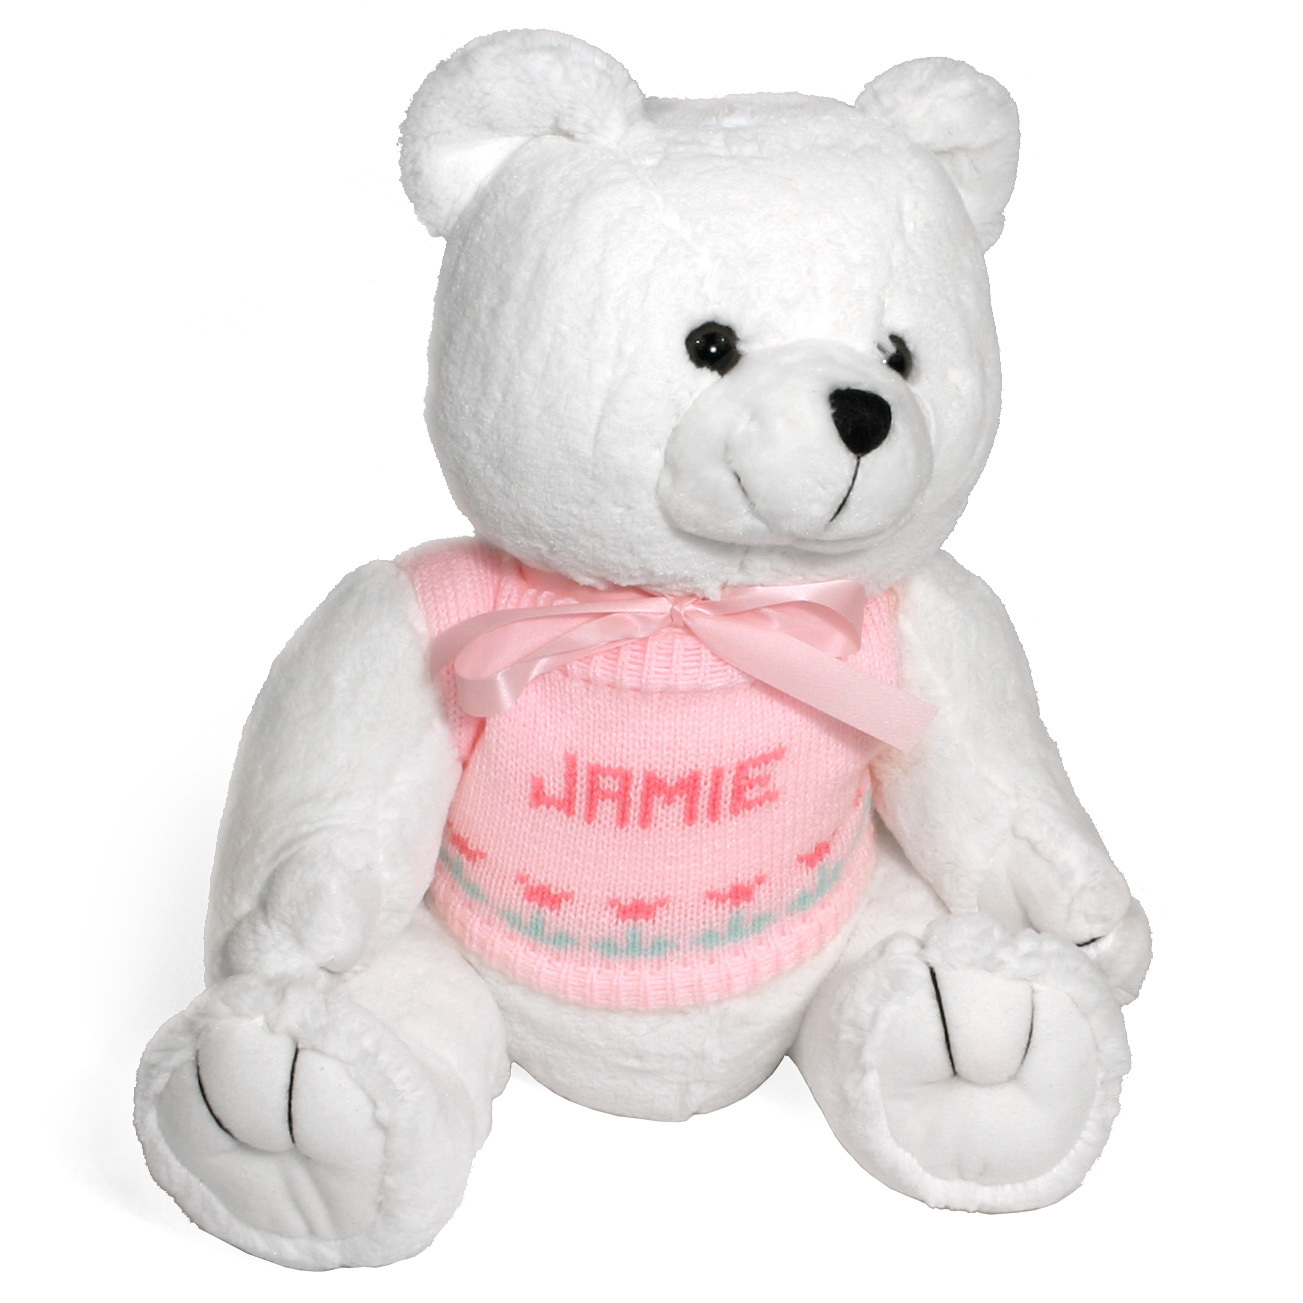 teddy bear with baby name